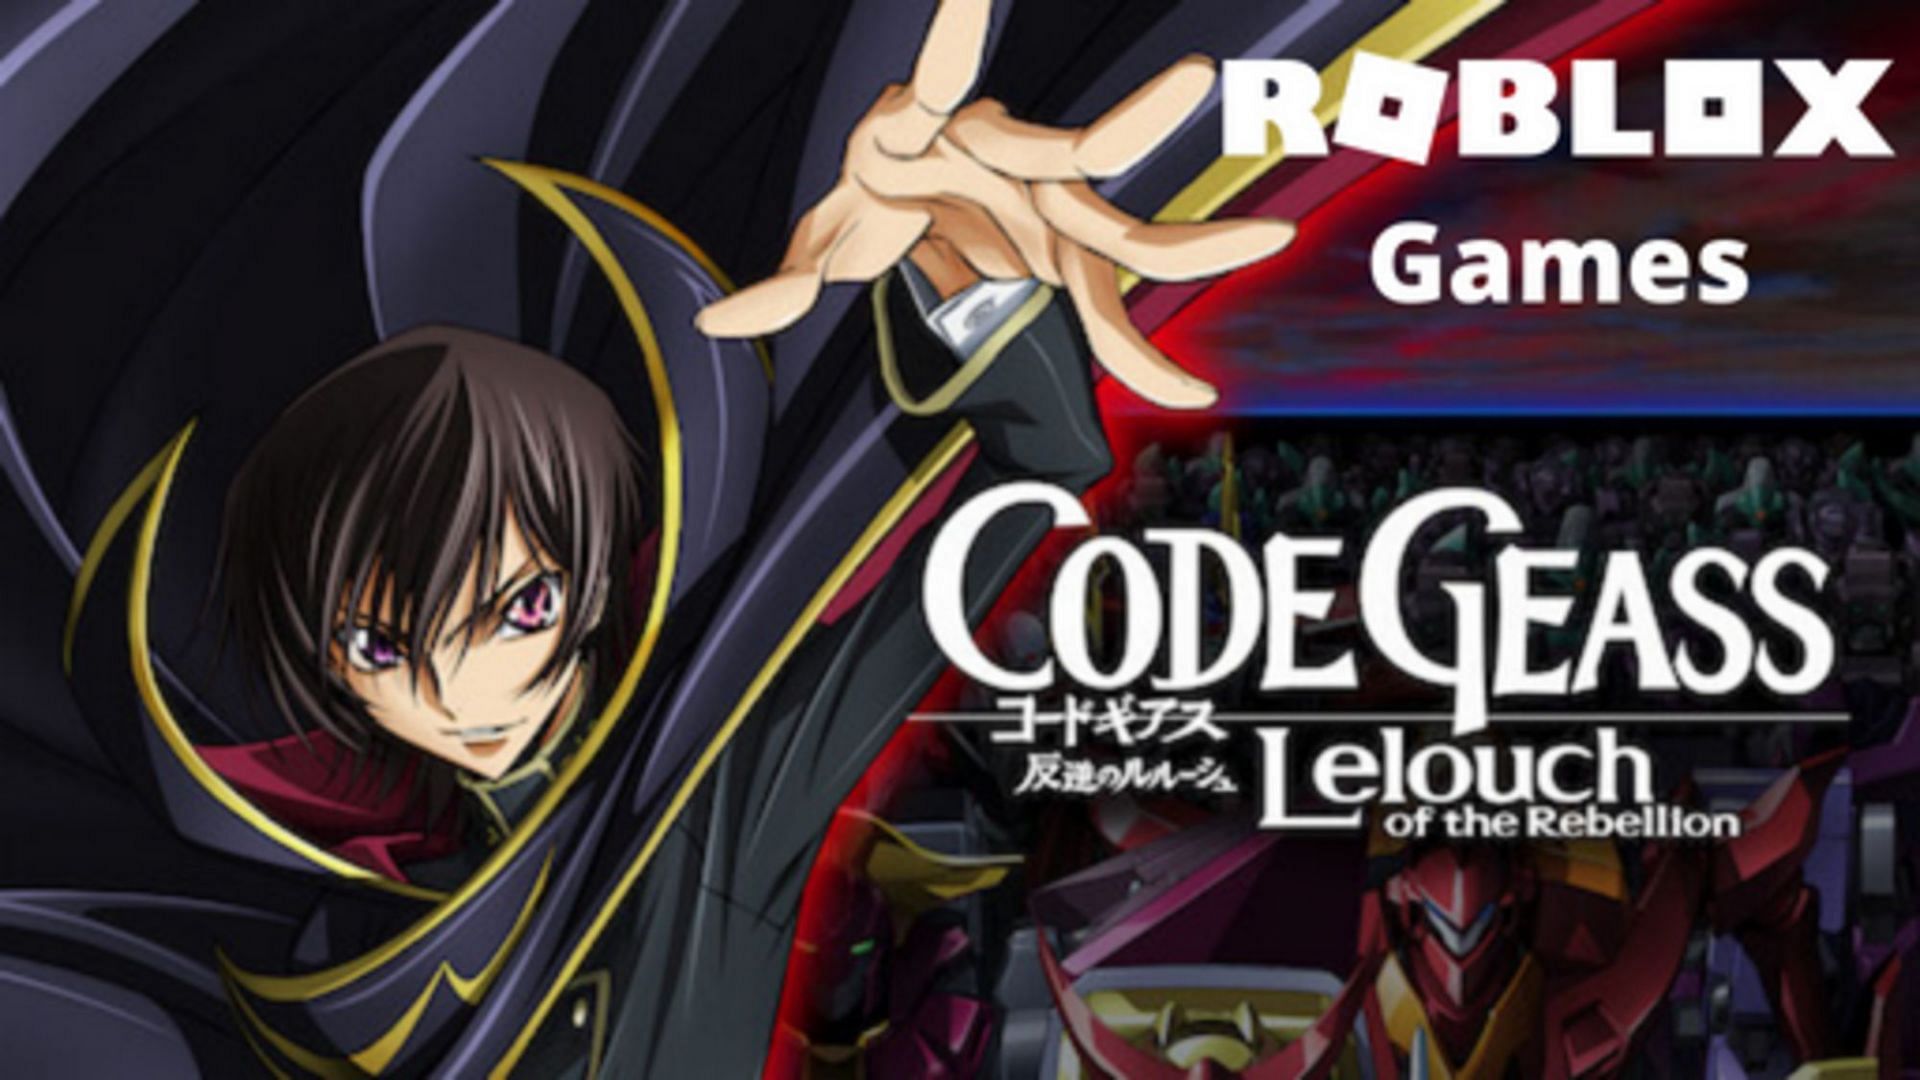 Roblox experiences for Code Geass fans (Image via Roblox)